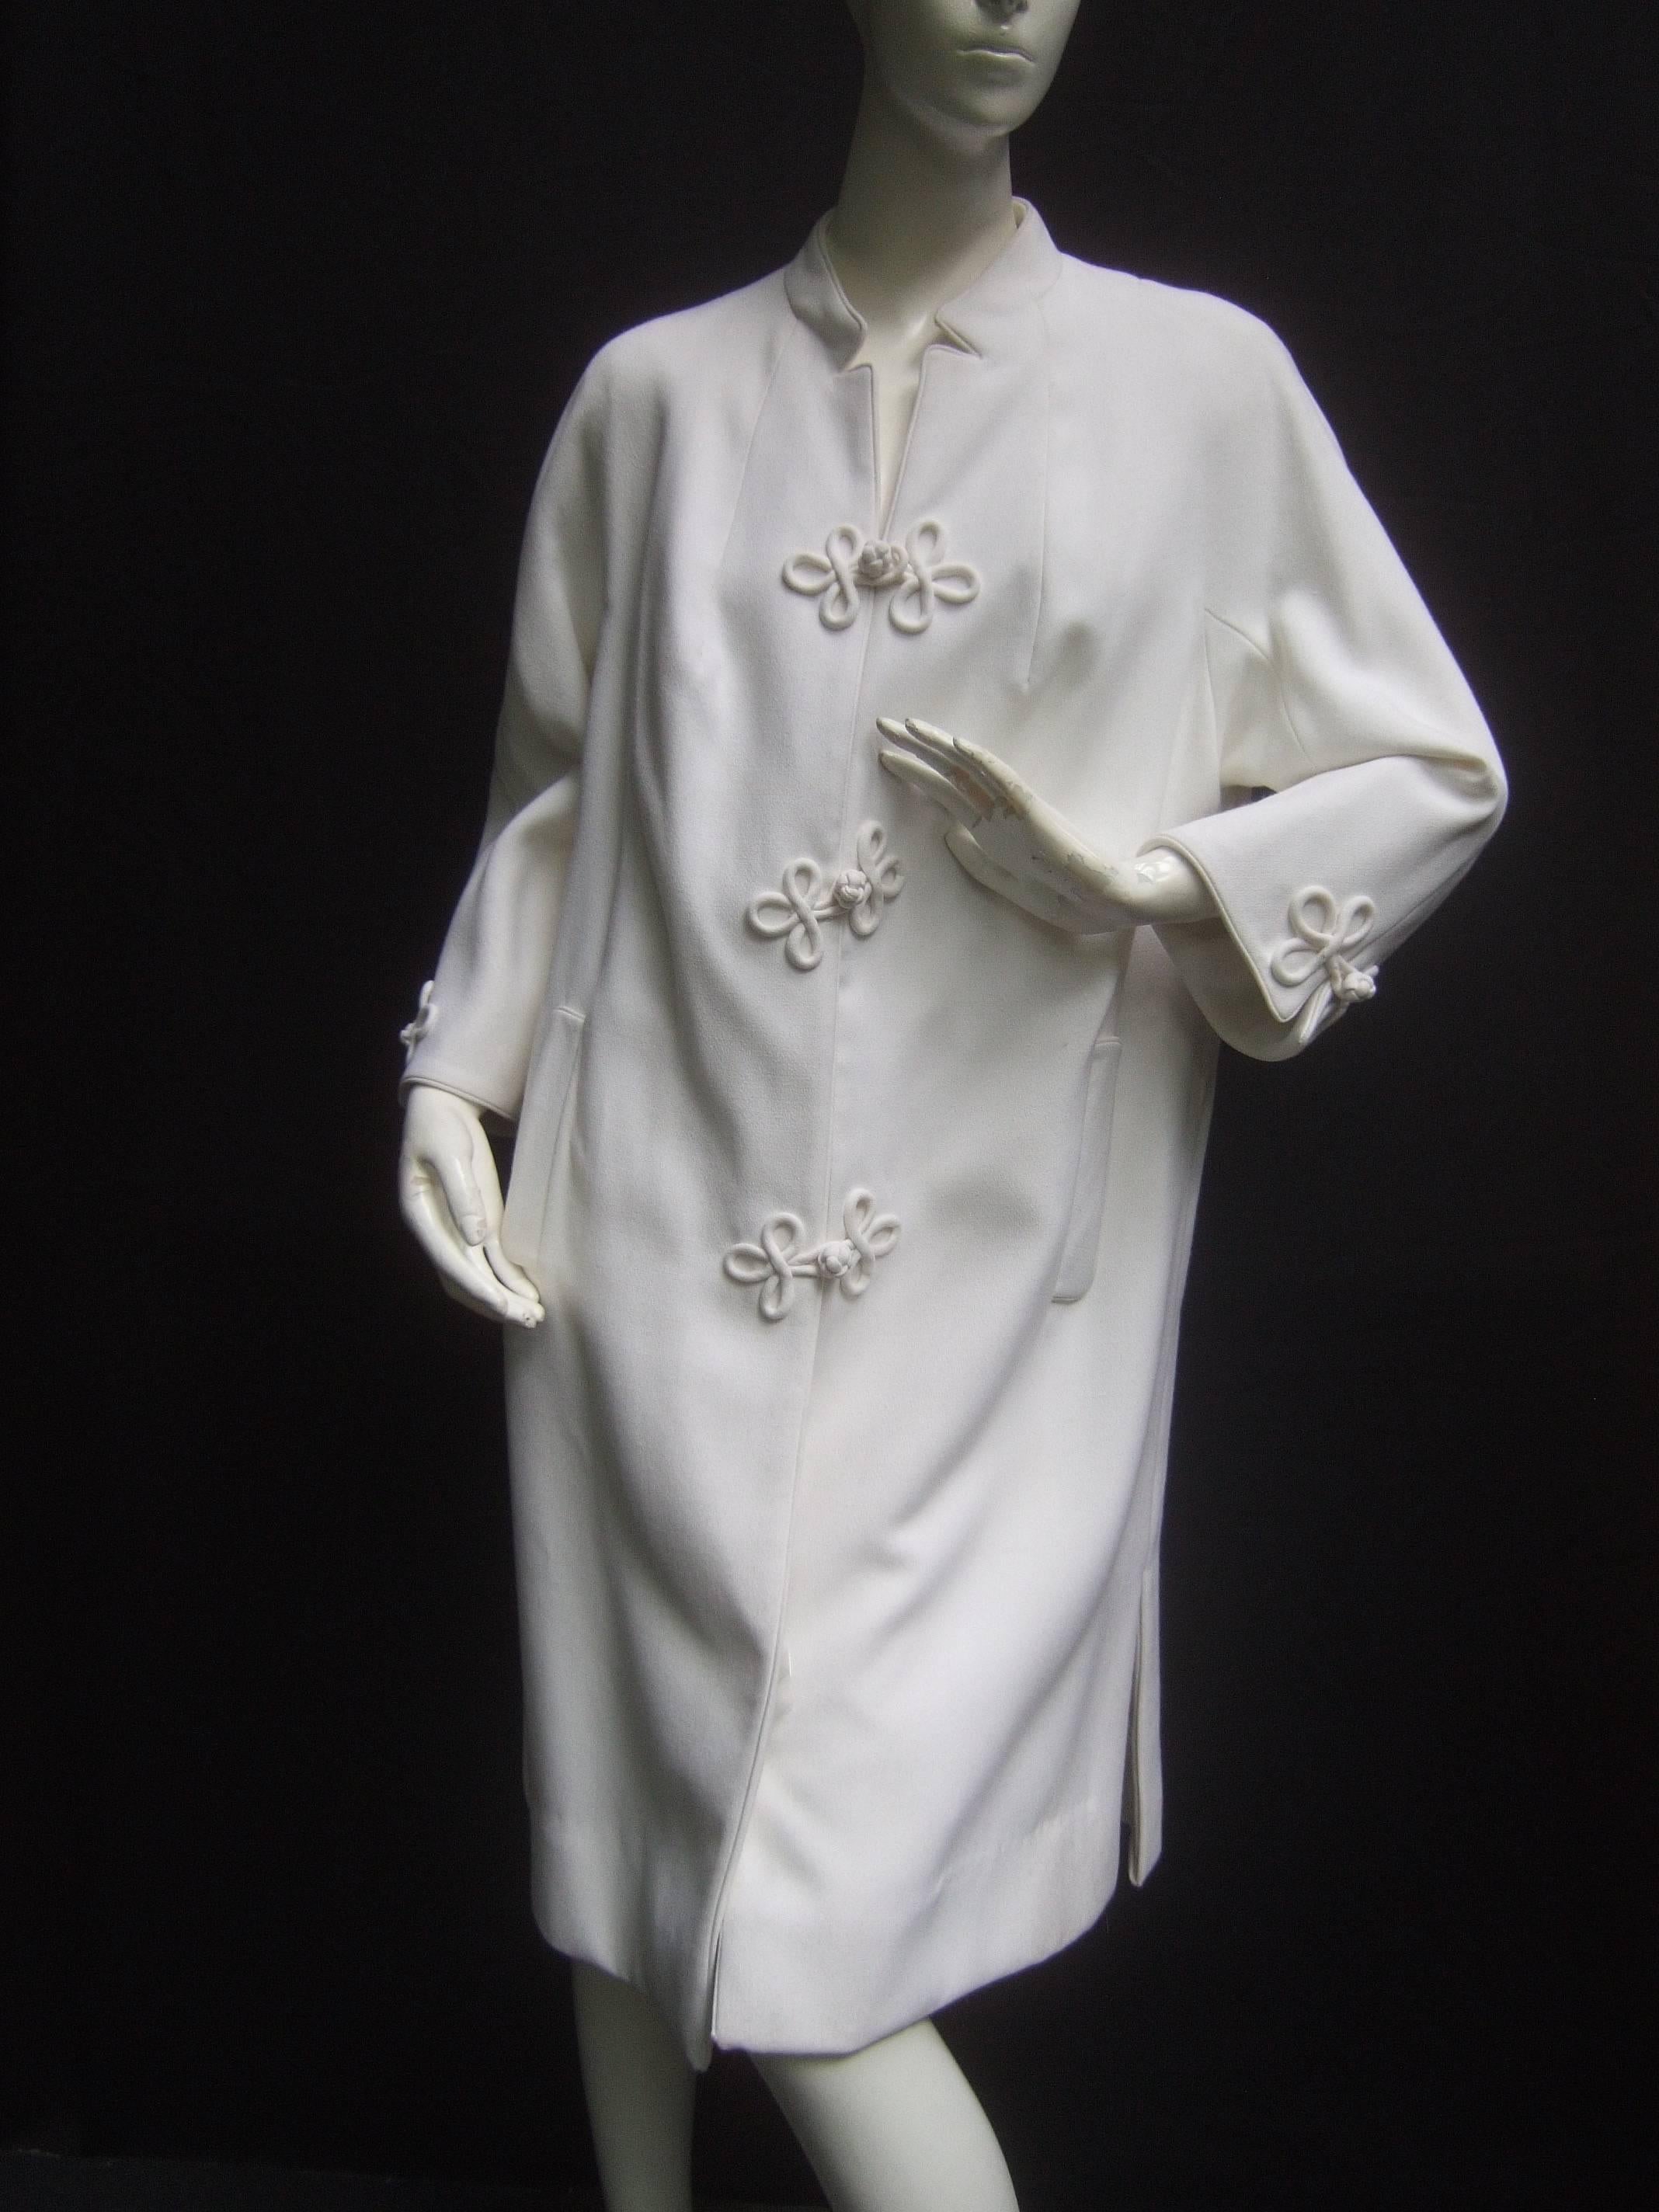 Crisp white frog button coat from Hong Kong c 1970s
The chic retro coat is designed with large frog
style closures that run down the front and extend
to both sleeves

The severe minimal design is enhanced with the
juxtaposition of the looped